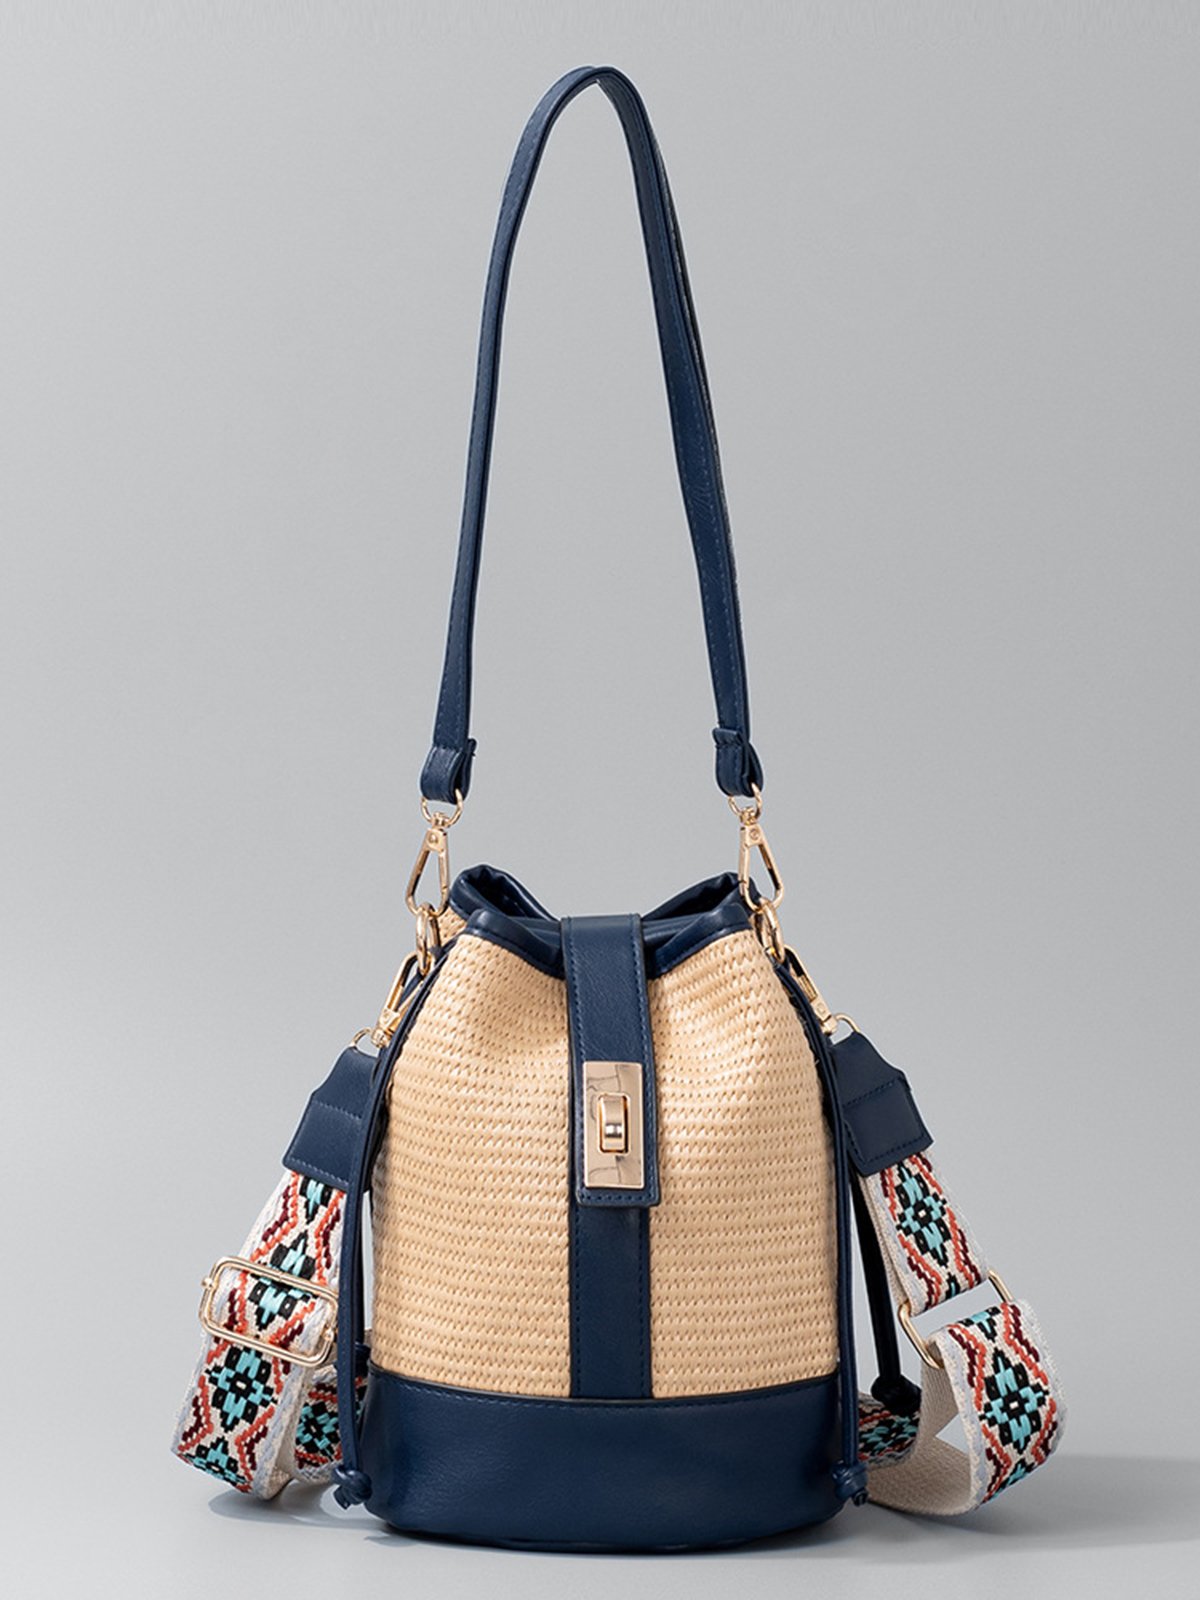 Handmade Straw Bags Vacation Color-block Shoulder Bag with Ethnic Cross-body Strap